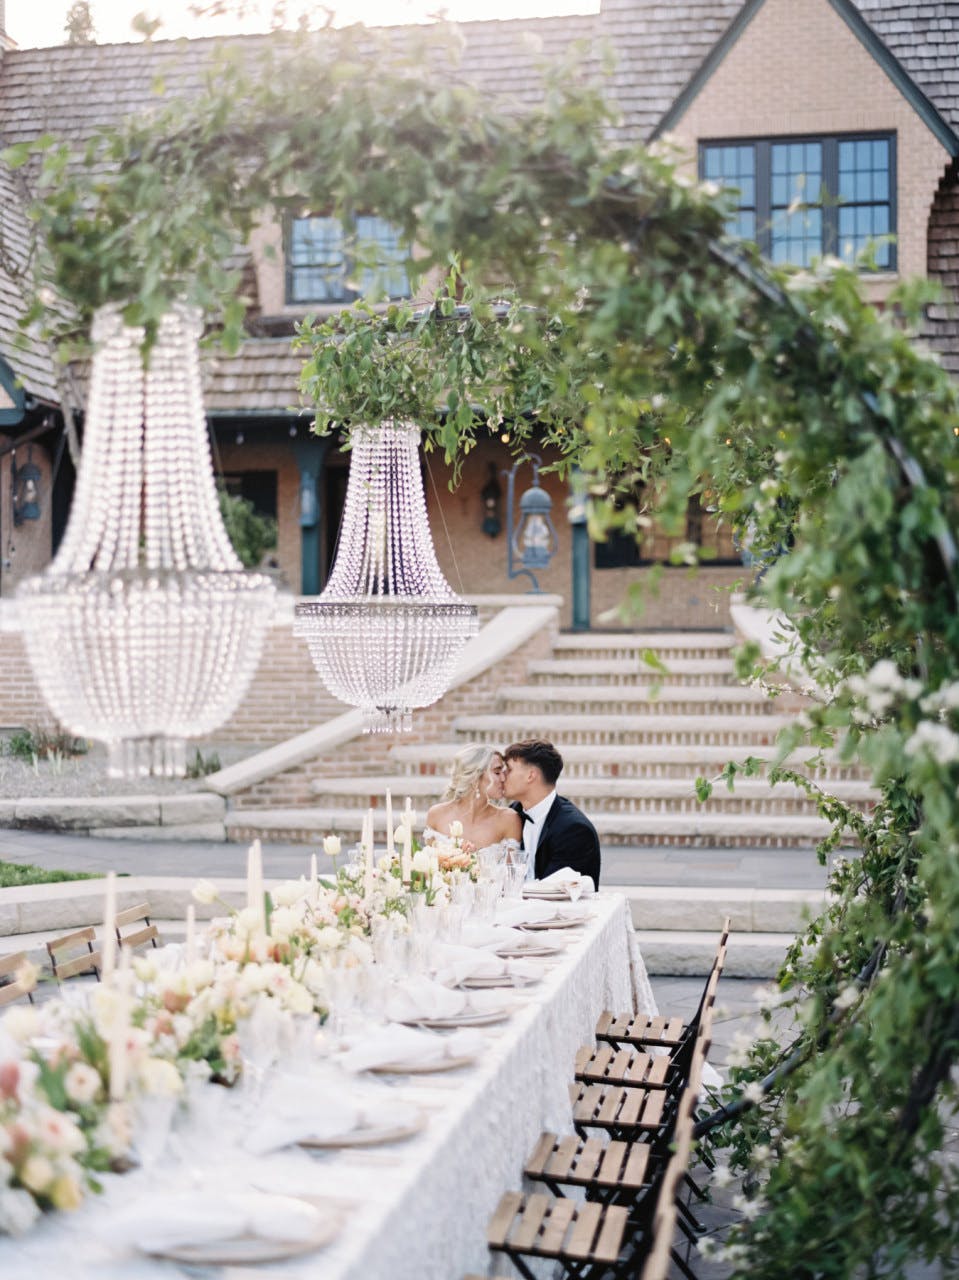 Bride and groom kiss at the end of a banquet table in that garden at modern European themed outdoor wedding with neutral color palette.